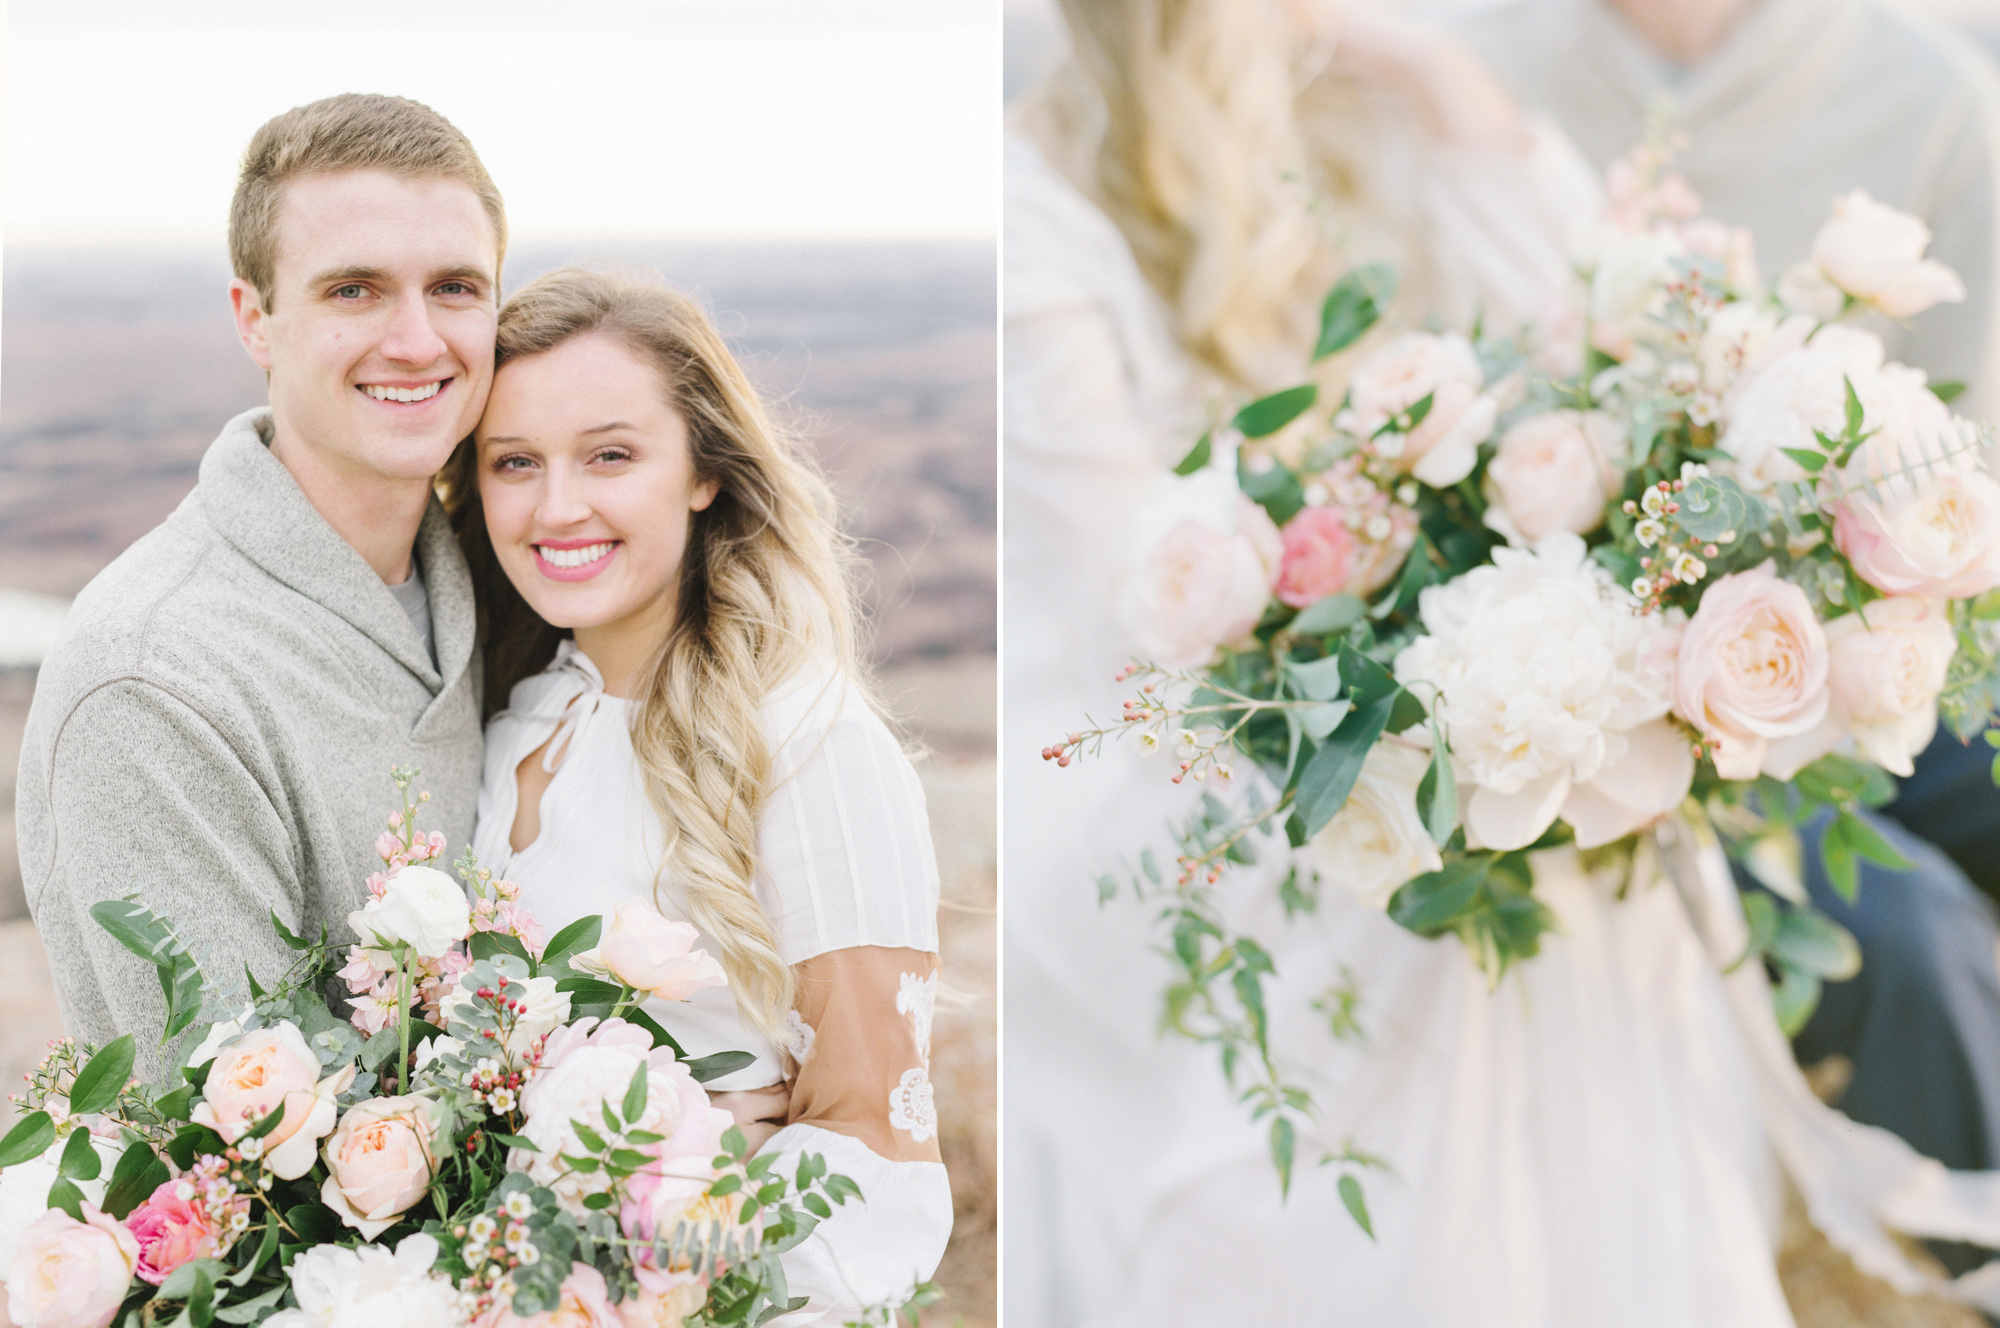 A beautiful bridal bouquet by Everly Alaine Florals for this White Sparrow engagement